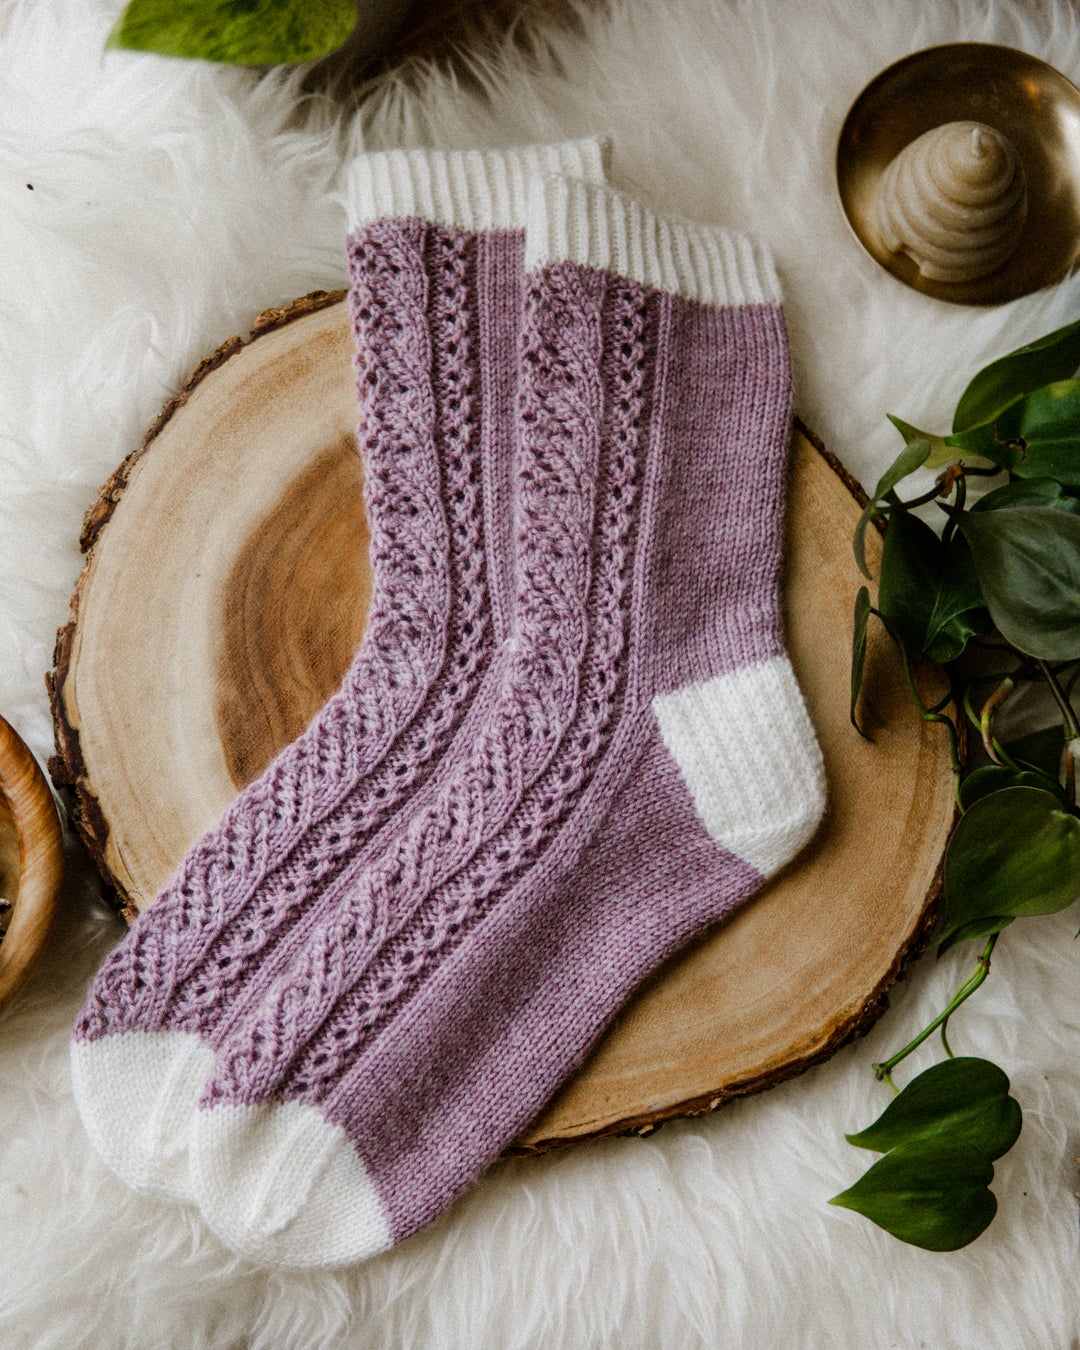 Seven Sock Knitting Patterns for Socktober Coziness - A Bee In The